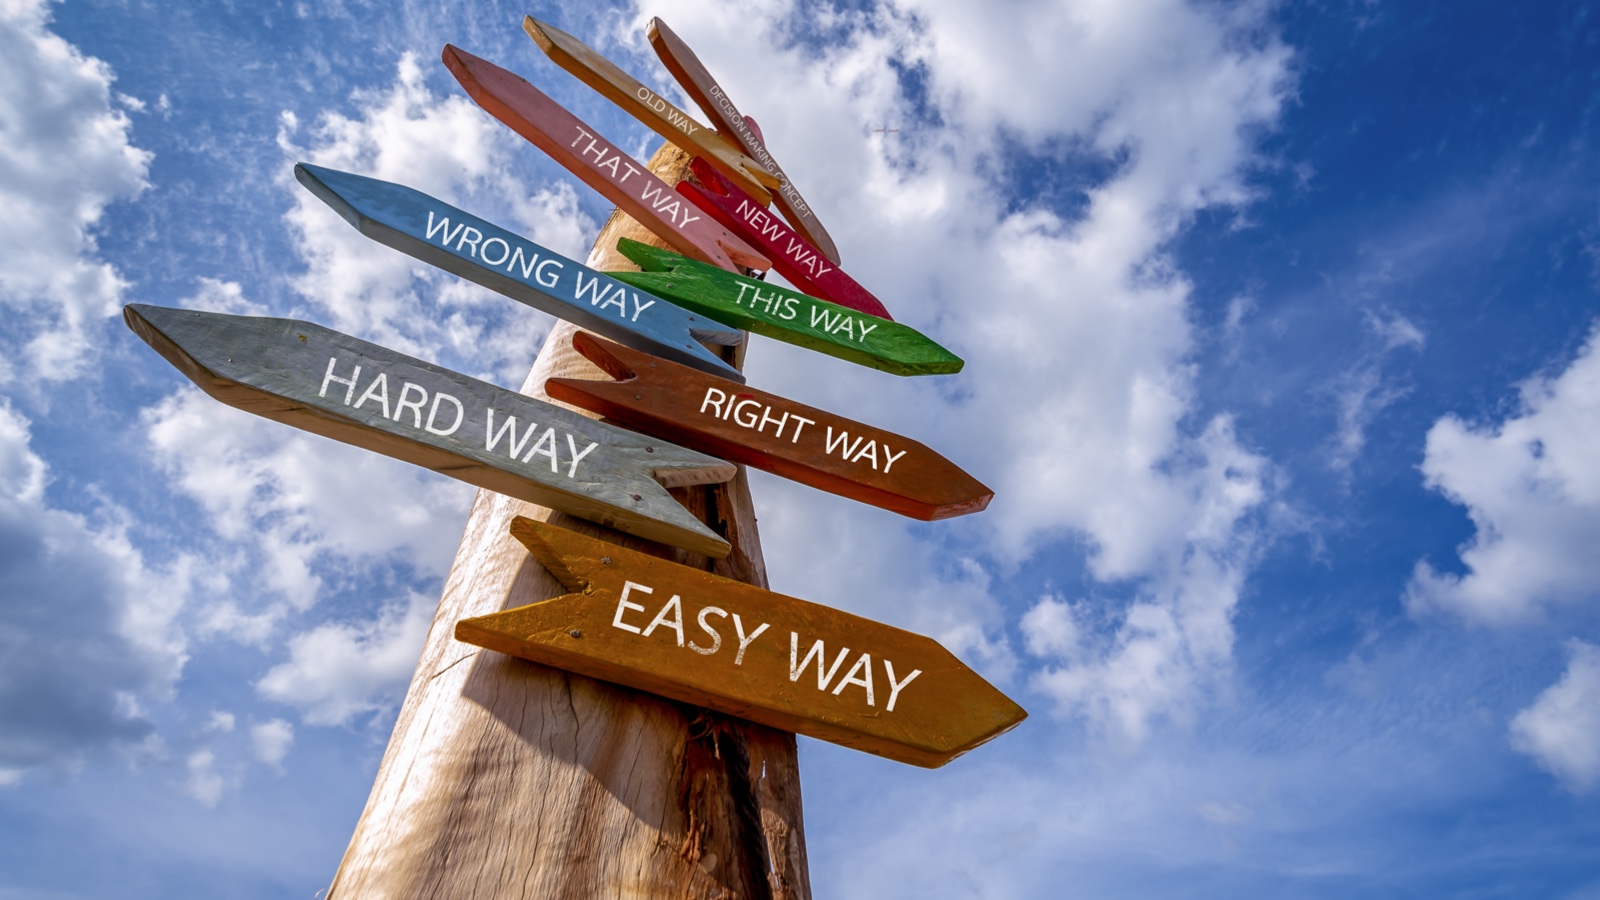 Post with signs pointing in different directions: Easy Way; Hard Way; Right Way; Wrong Way; This Way.